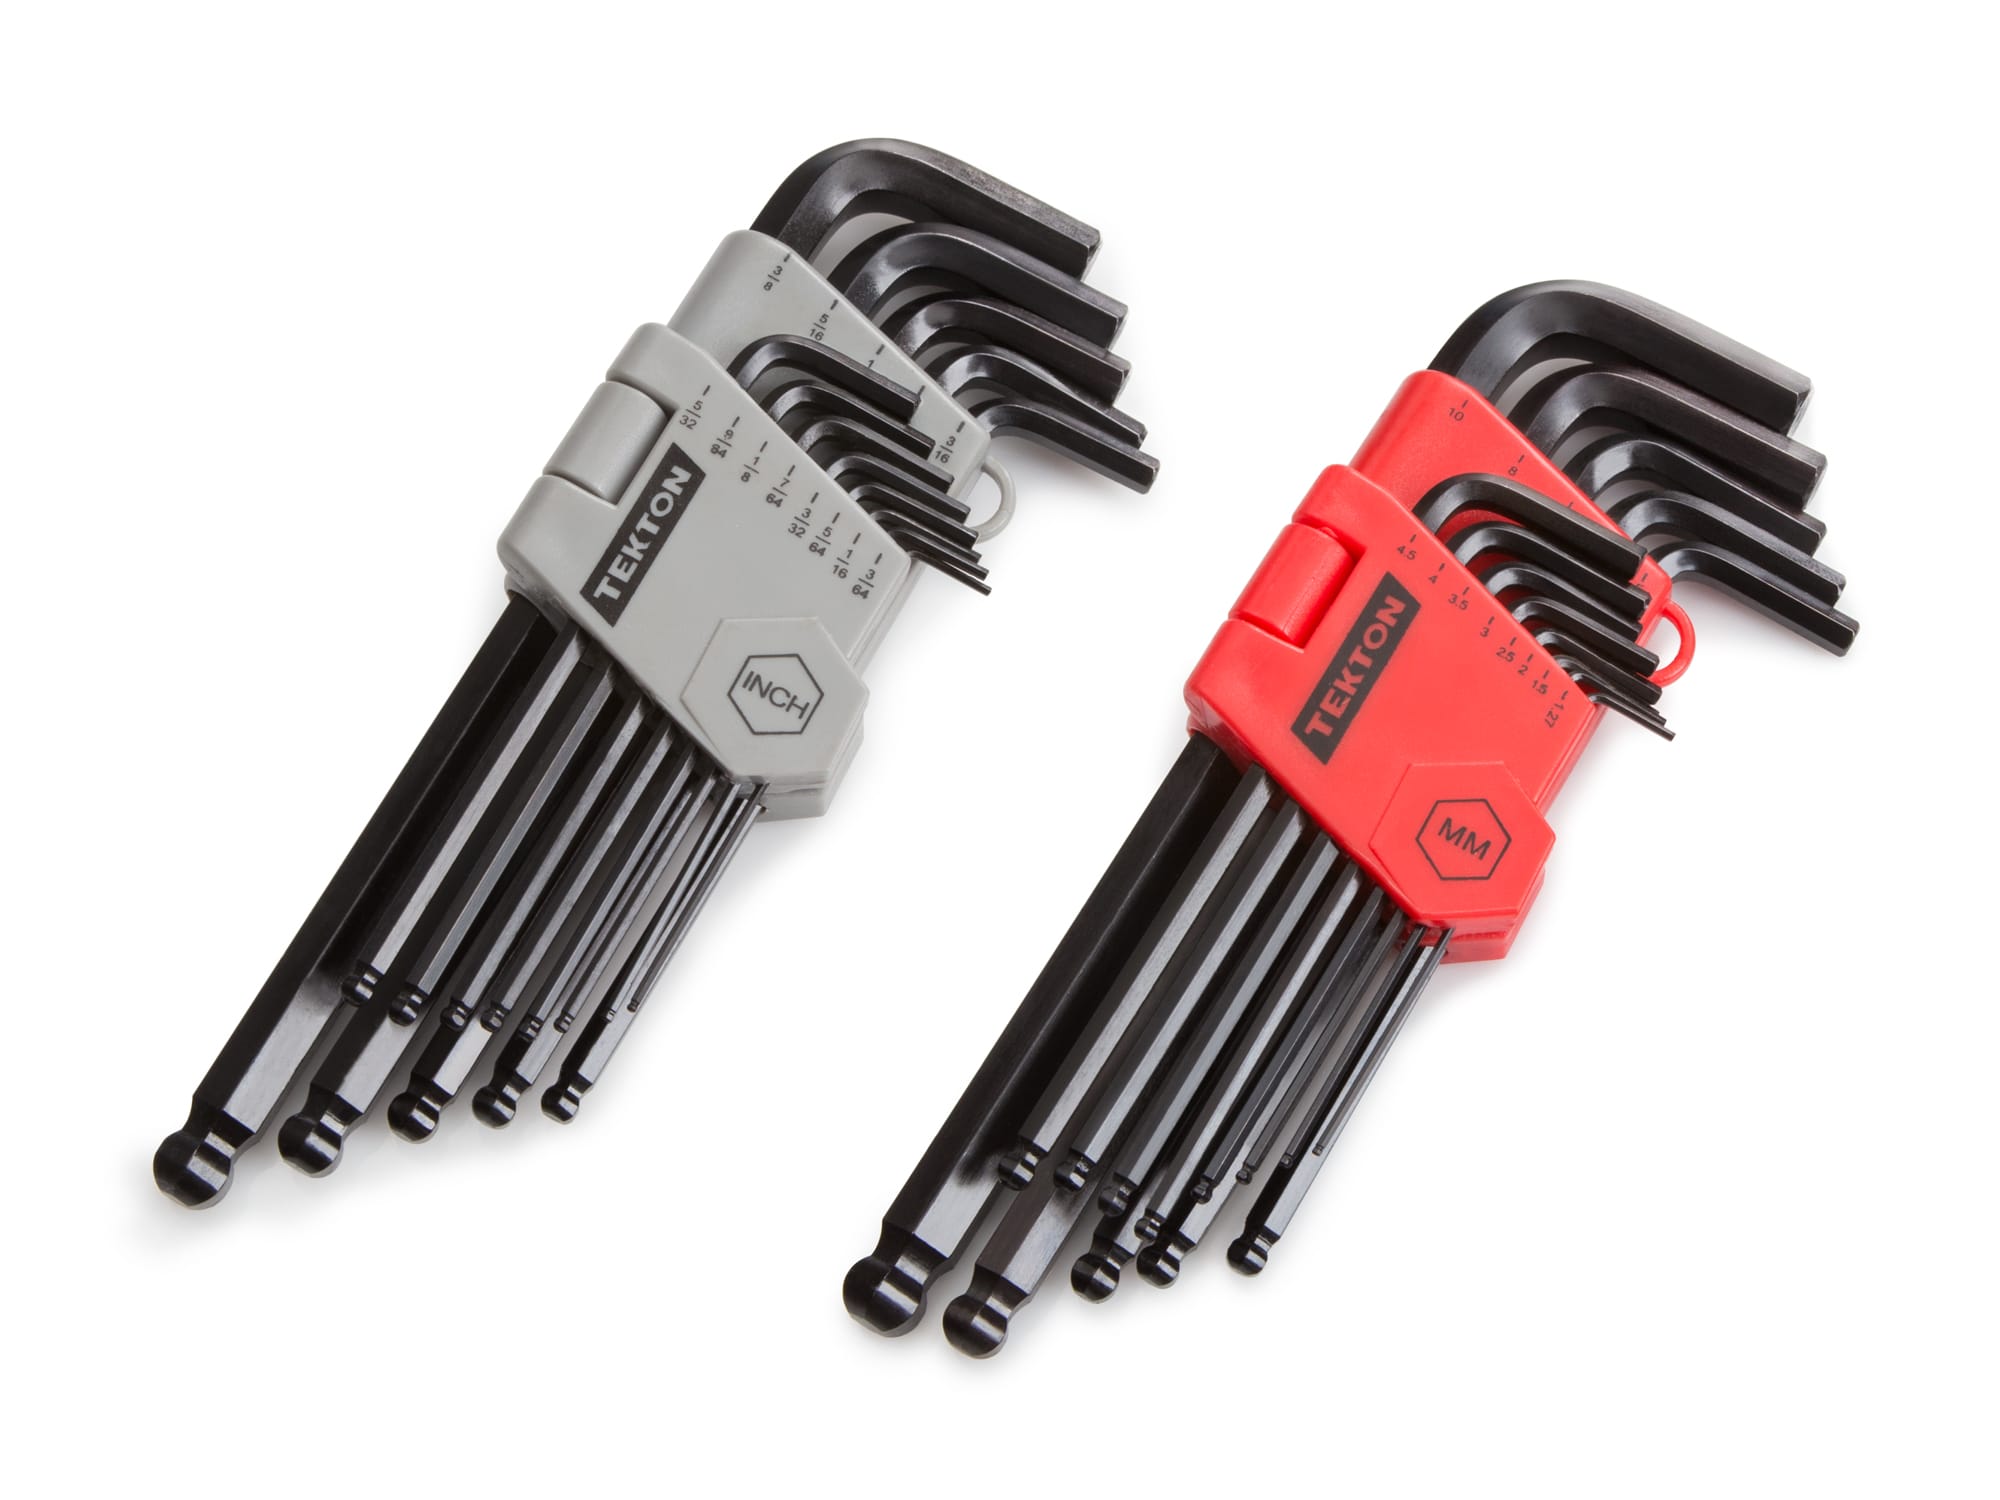 Long Arm Ball End Hex Key Wrench Set, 26-Piece